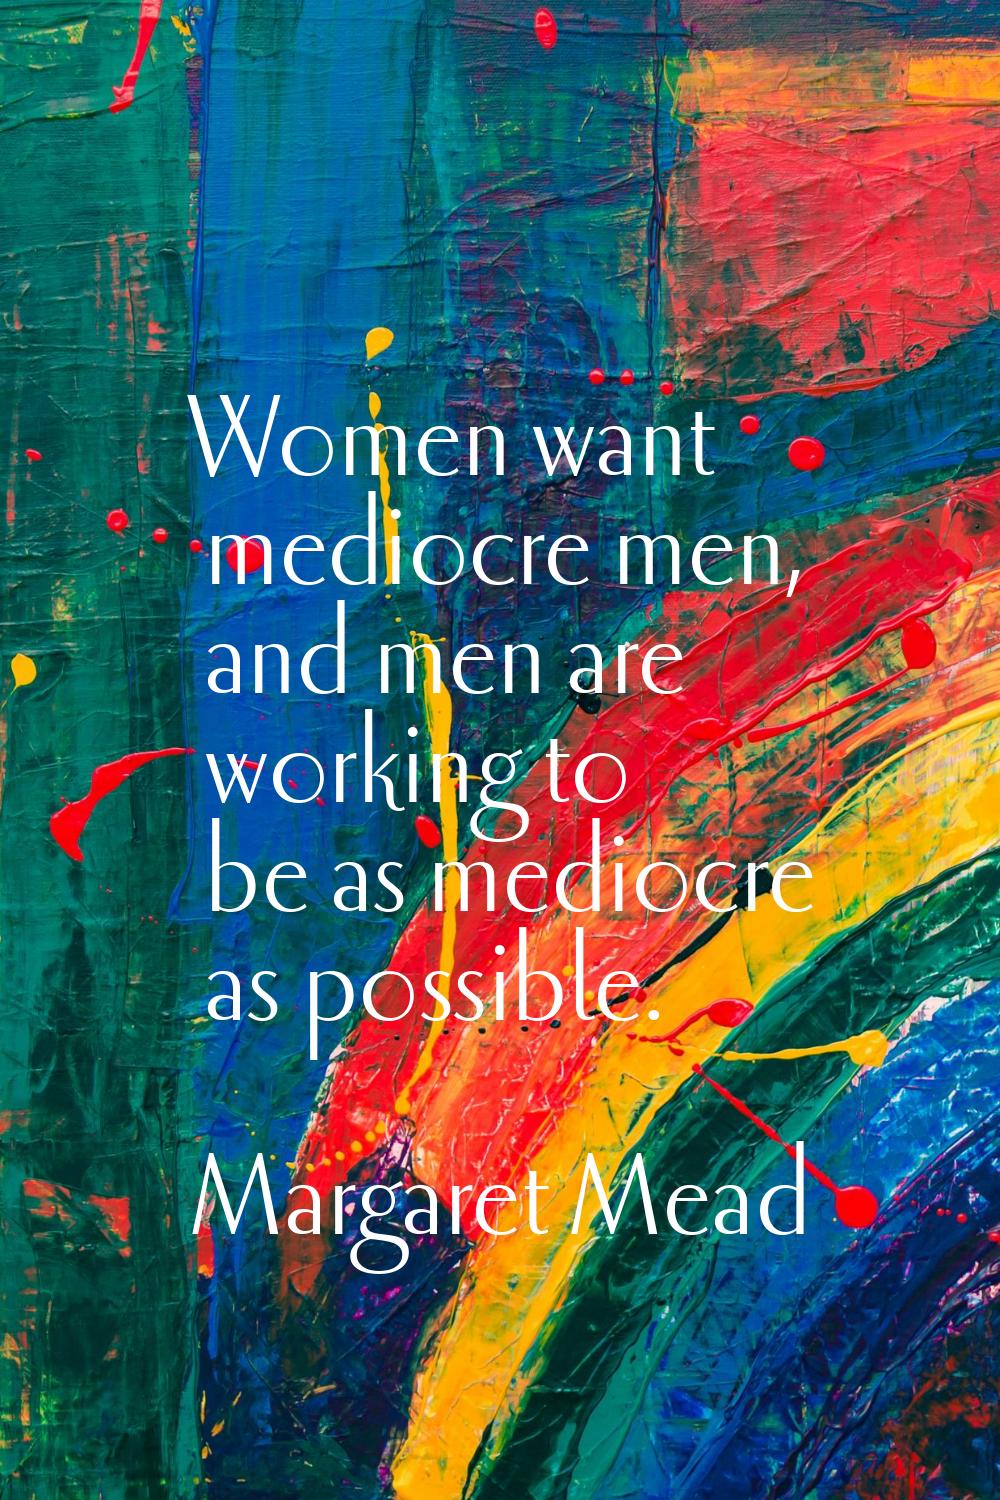 Women want mediocre men, and men are working to be as mediocre as possible.